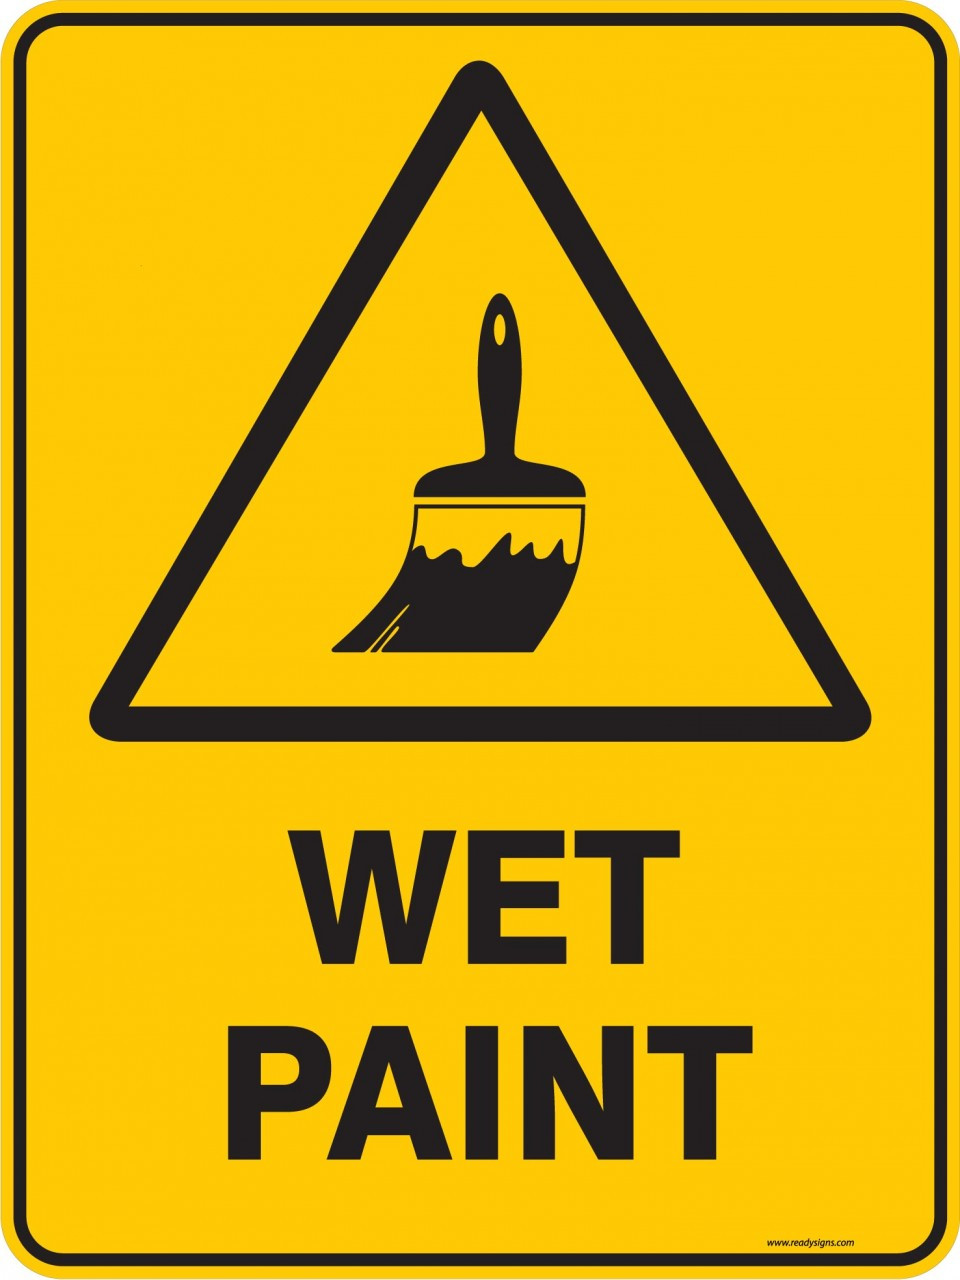 Signs For Wet Paint